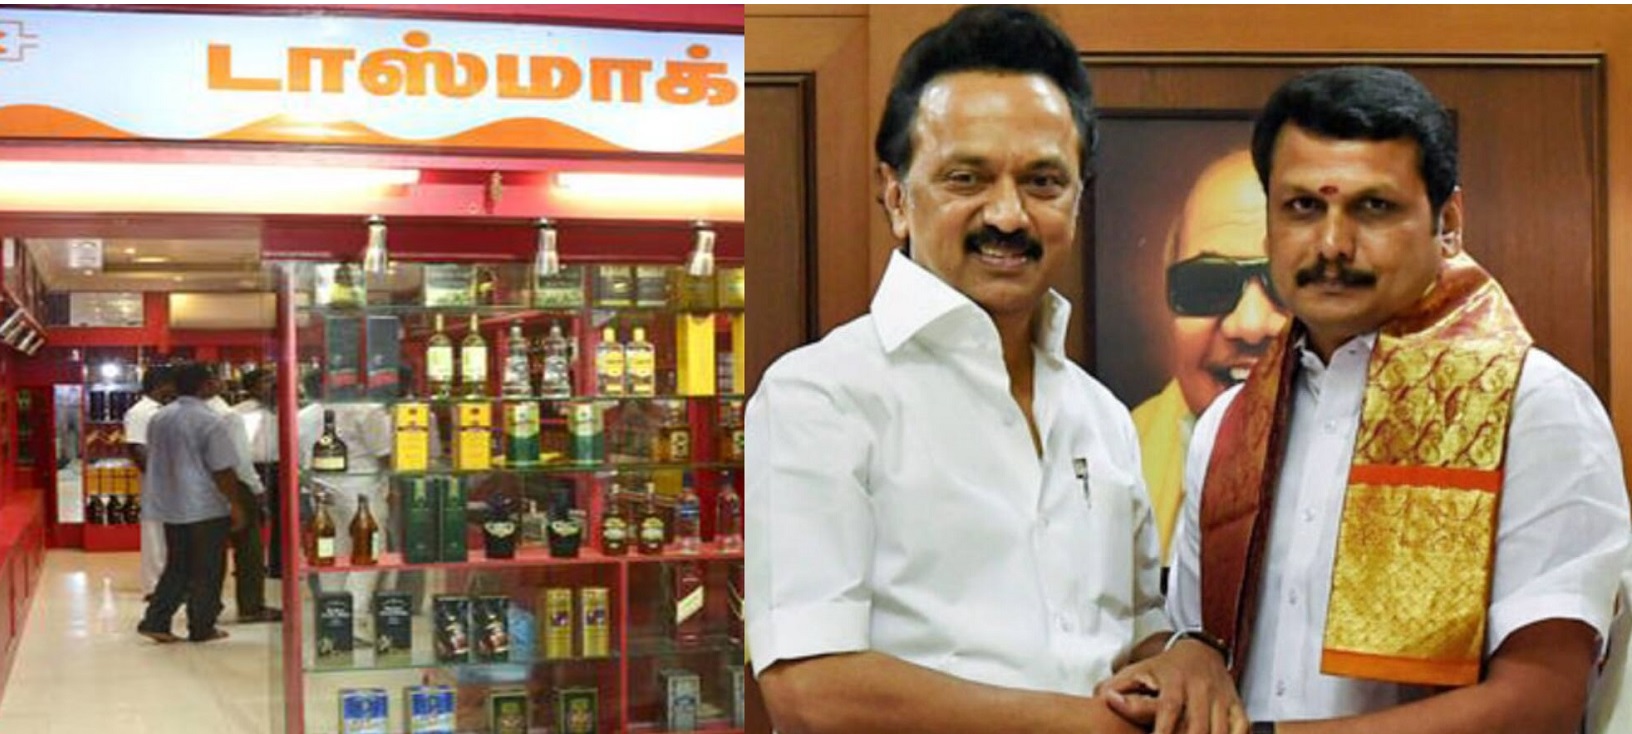 Facing Opposition backlash for decision to serve alcohol at public events, Tamil Nadu amends order